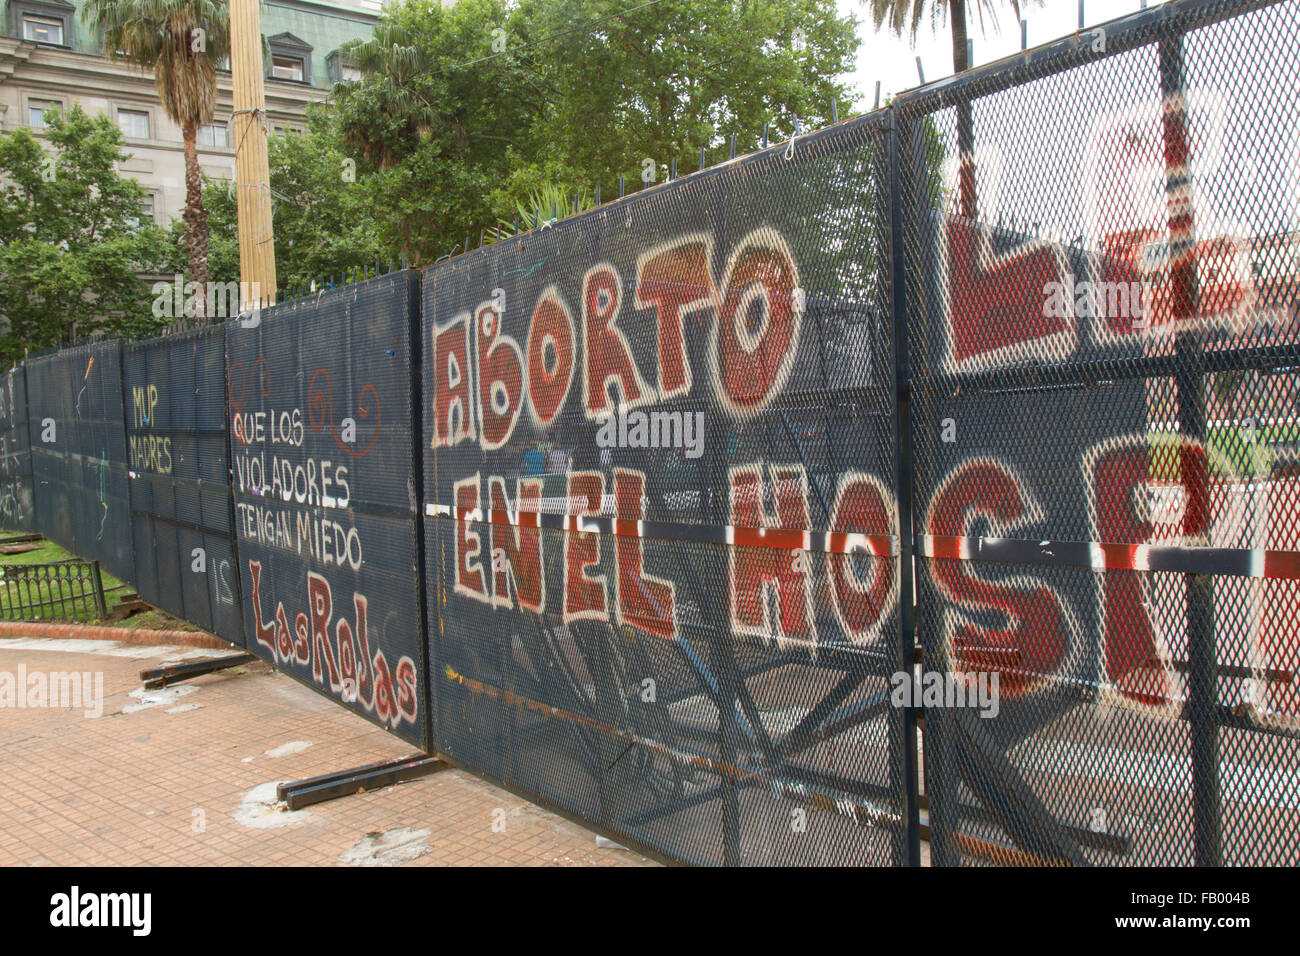 Buenos Aires, Argentina - December 4, 2015 :  Protests spray painted on fencing in the Plaza de Mayo, Buenos Aires, Argentina. Stock Photo